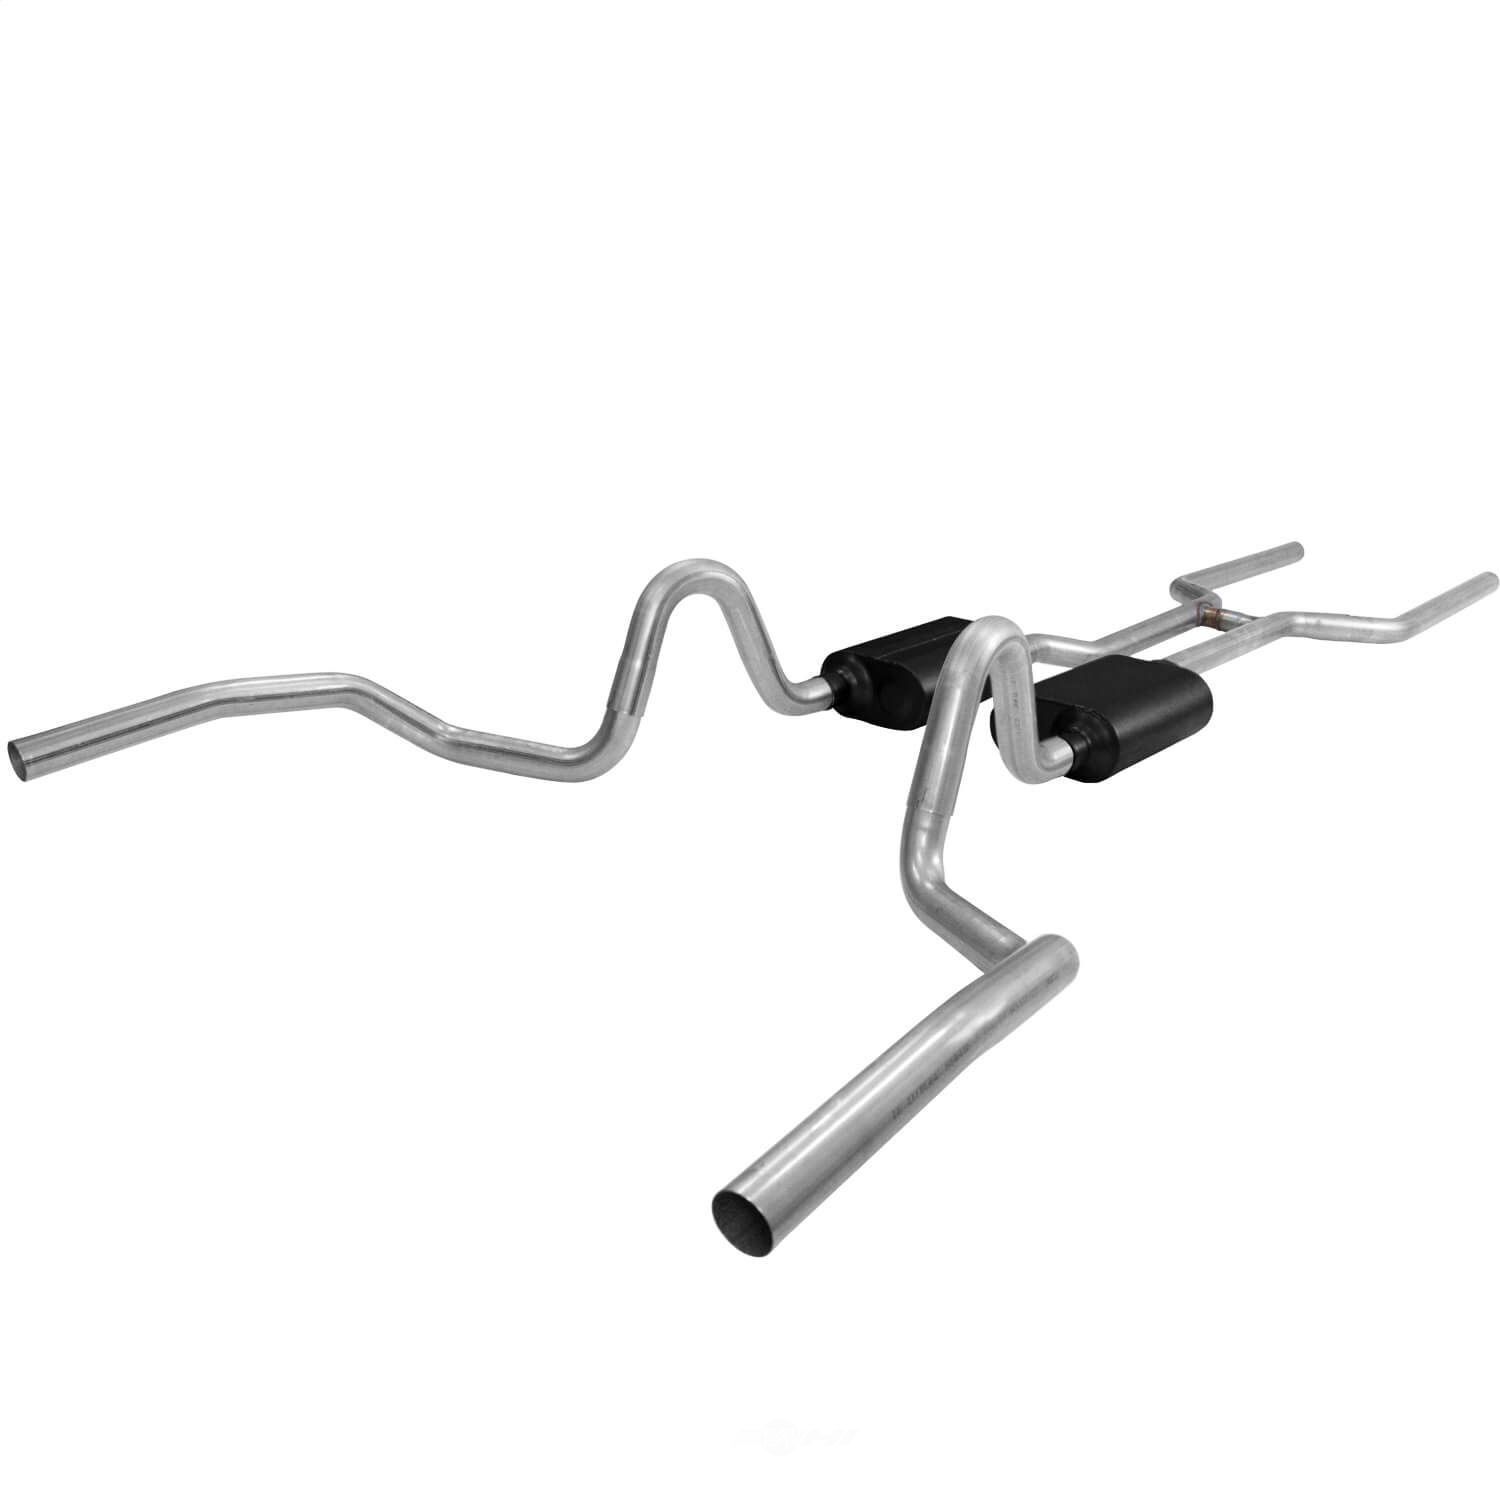 Exhaust System Kit-American Thunder Header Back Exhaust System Flowmaster 817409